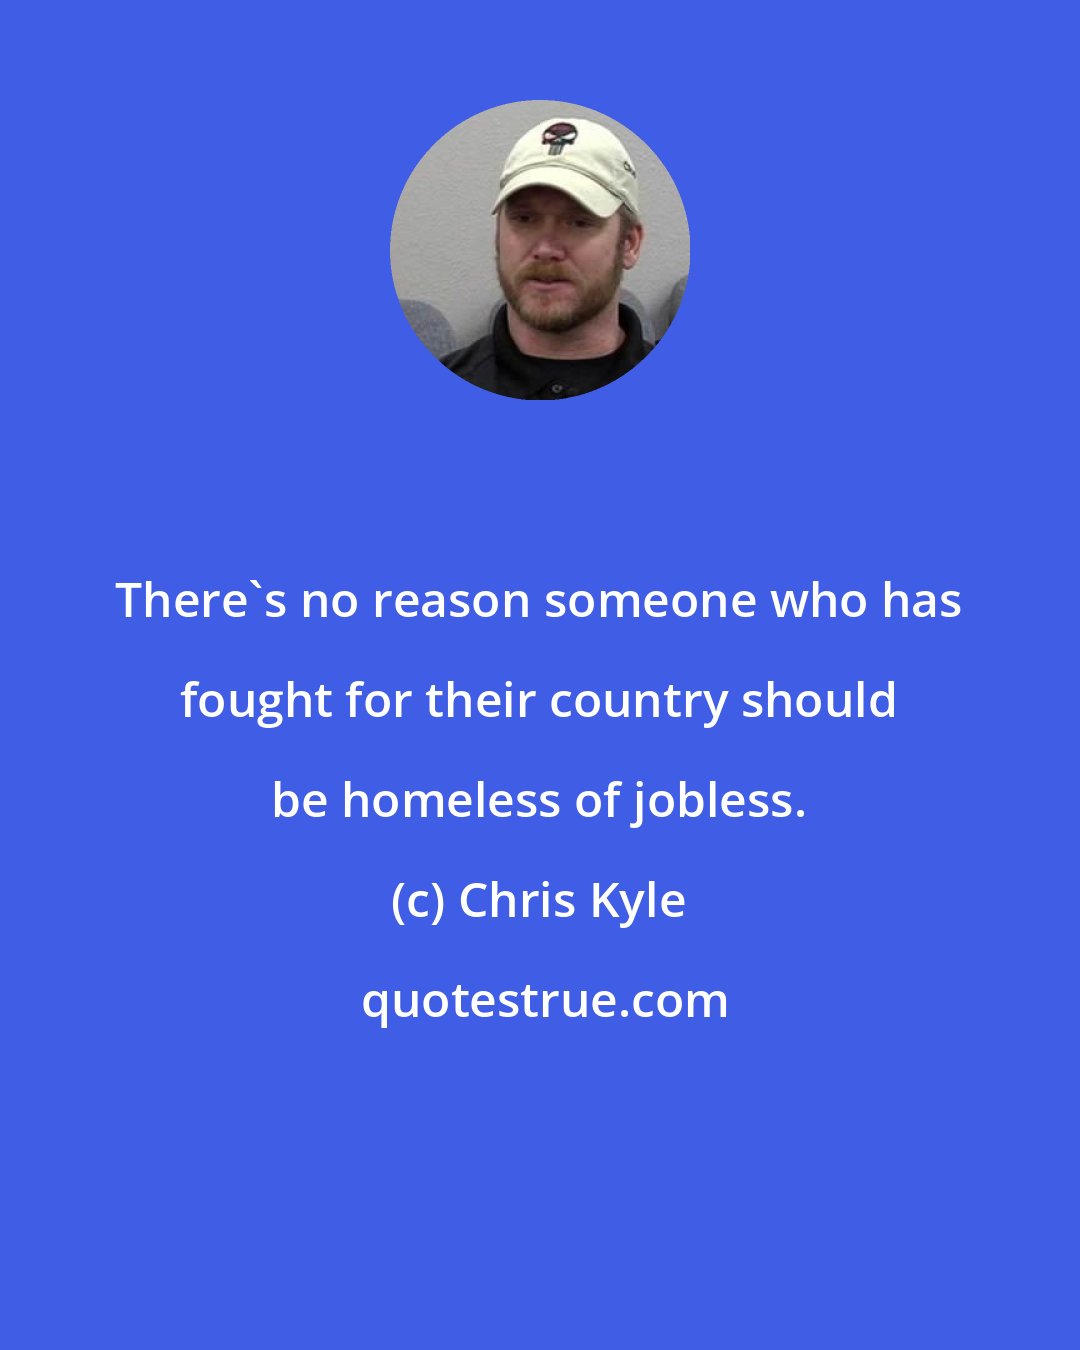 Chris Kyle: There's no reason someone who has fought for their country should be homeless of jobless.